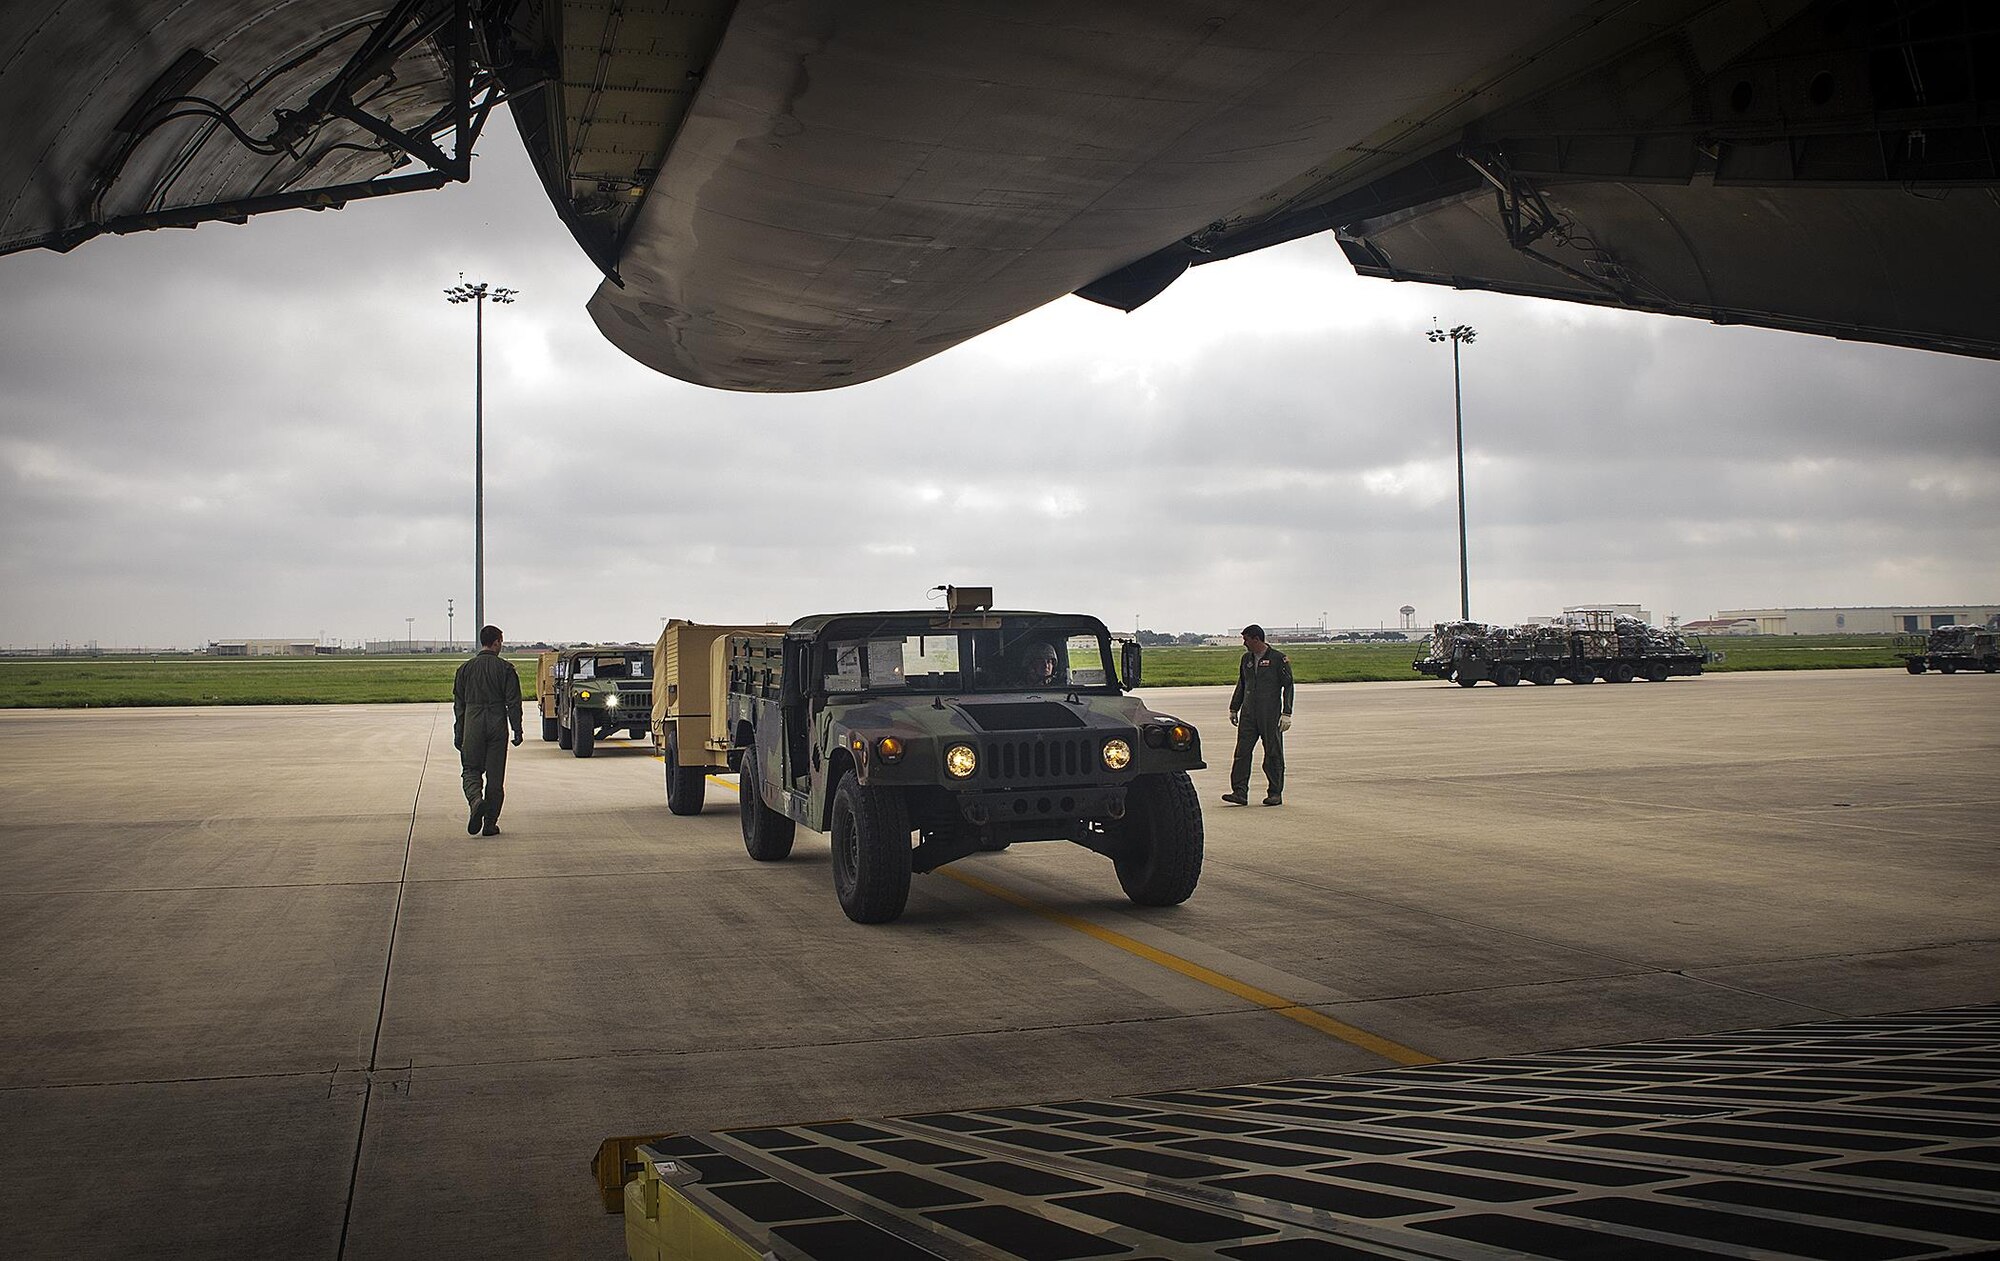 Loadmasters Senior Airman Joshua Green, left, and Tech. Sgt. Jason Badder, 68th Airlift Squadron, perform pre-flight inspections on Humvees prior to loading them on a C-5A Galaxy aircraft Sept. 8, 2016 at Joint Base San Antonio-Lackland, Texas. U.S. Army South’s Headquarters and Headquarters Battalion Soliders from JBSA-Fort Sam-Houston are taking part in a weeklong emergency deployment exercise at Naval Station Guantanamo Bay, Cuba. (U.S. Air Force photo by Benjamin Faske)